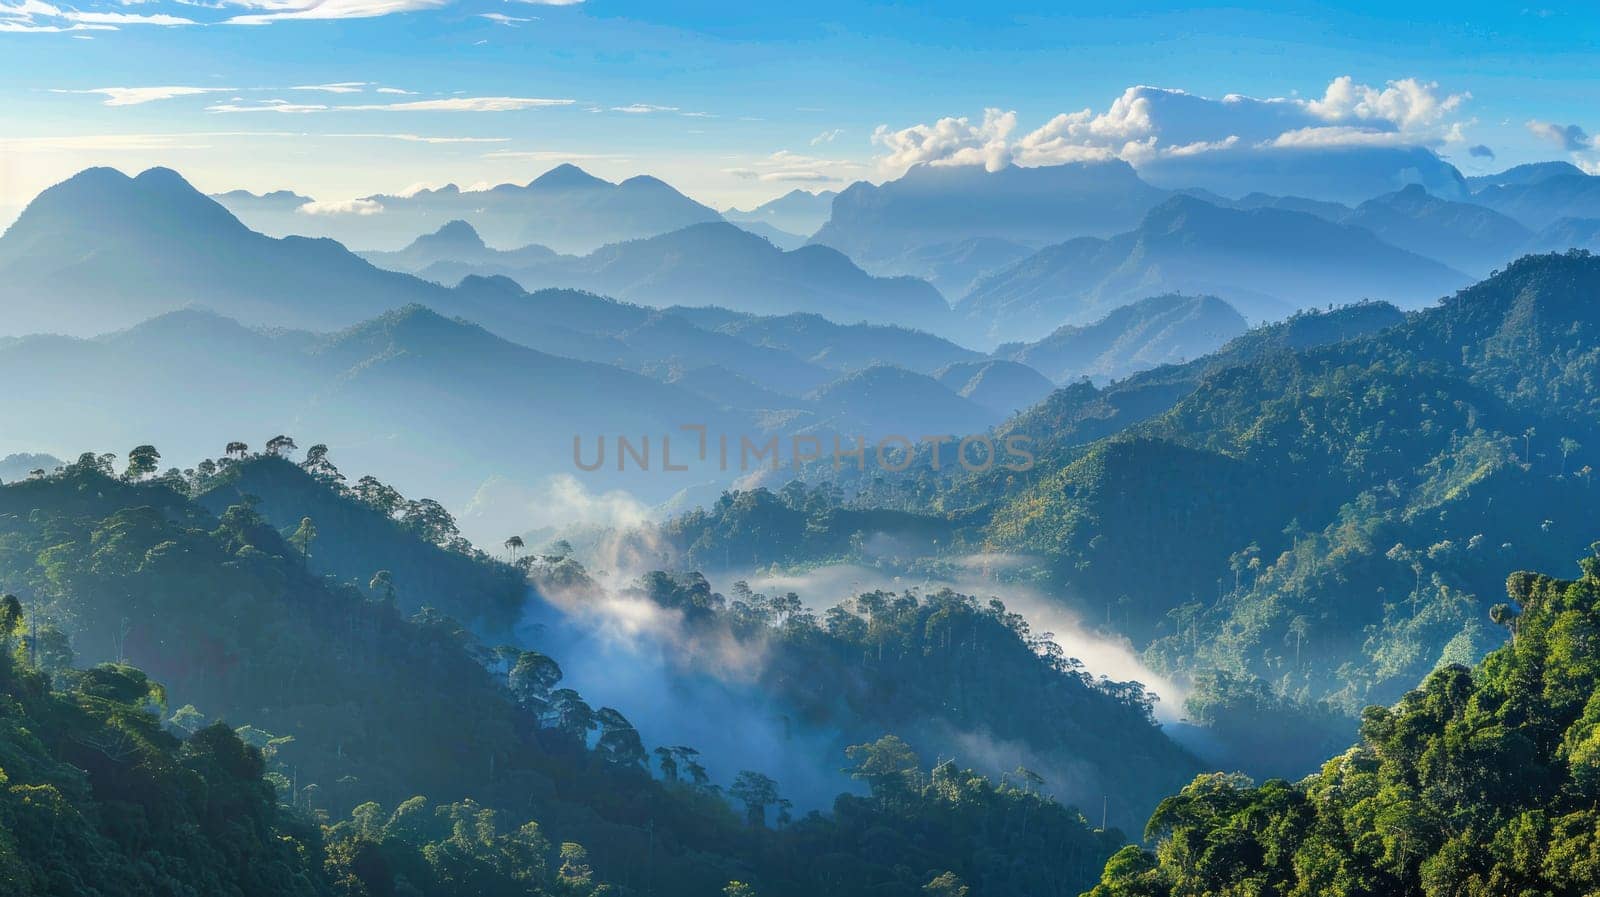 A panoramic vista of a tropical mountain range, with mist-shrouded peaks rising majestically against a backdrop of clear blue skies, offering a glimpse into the awe-inspiring grandeur of untouched.